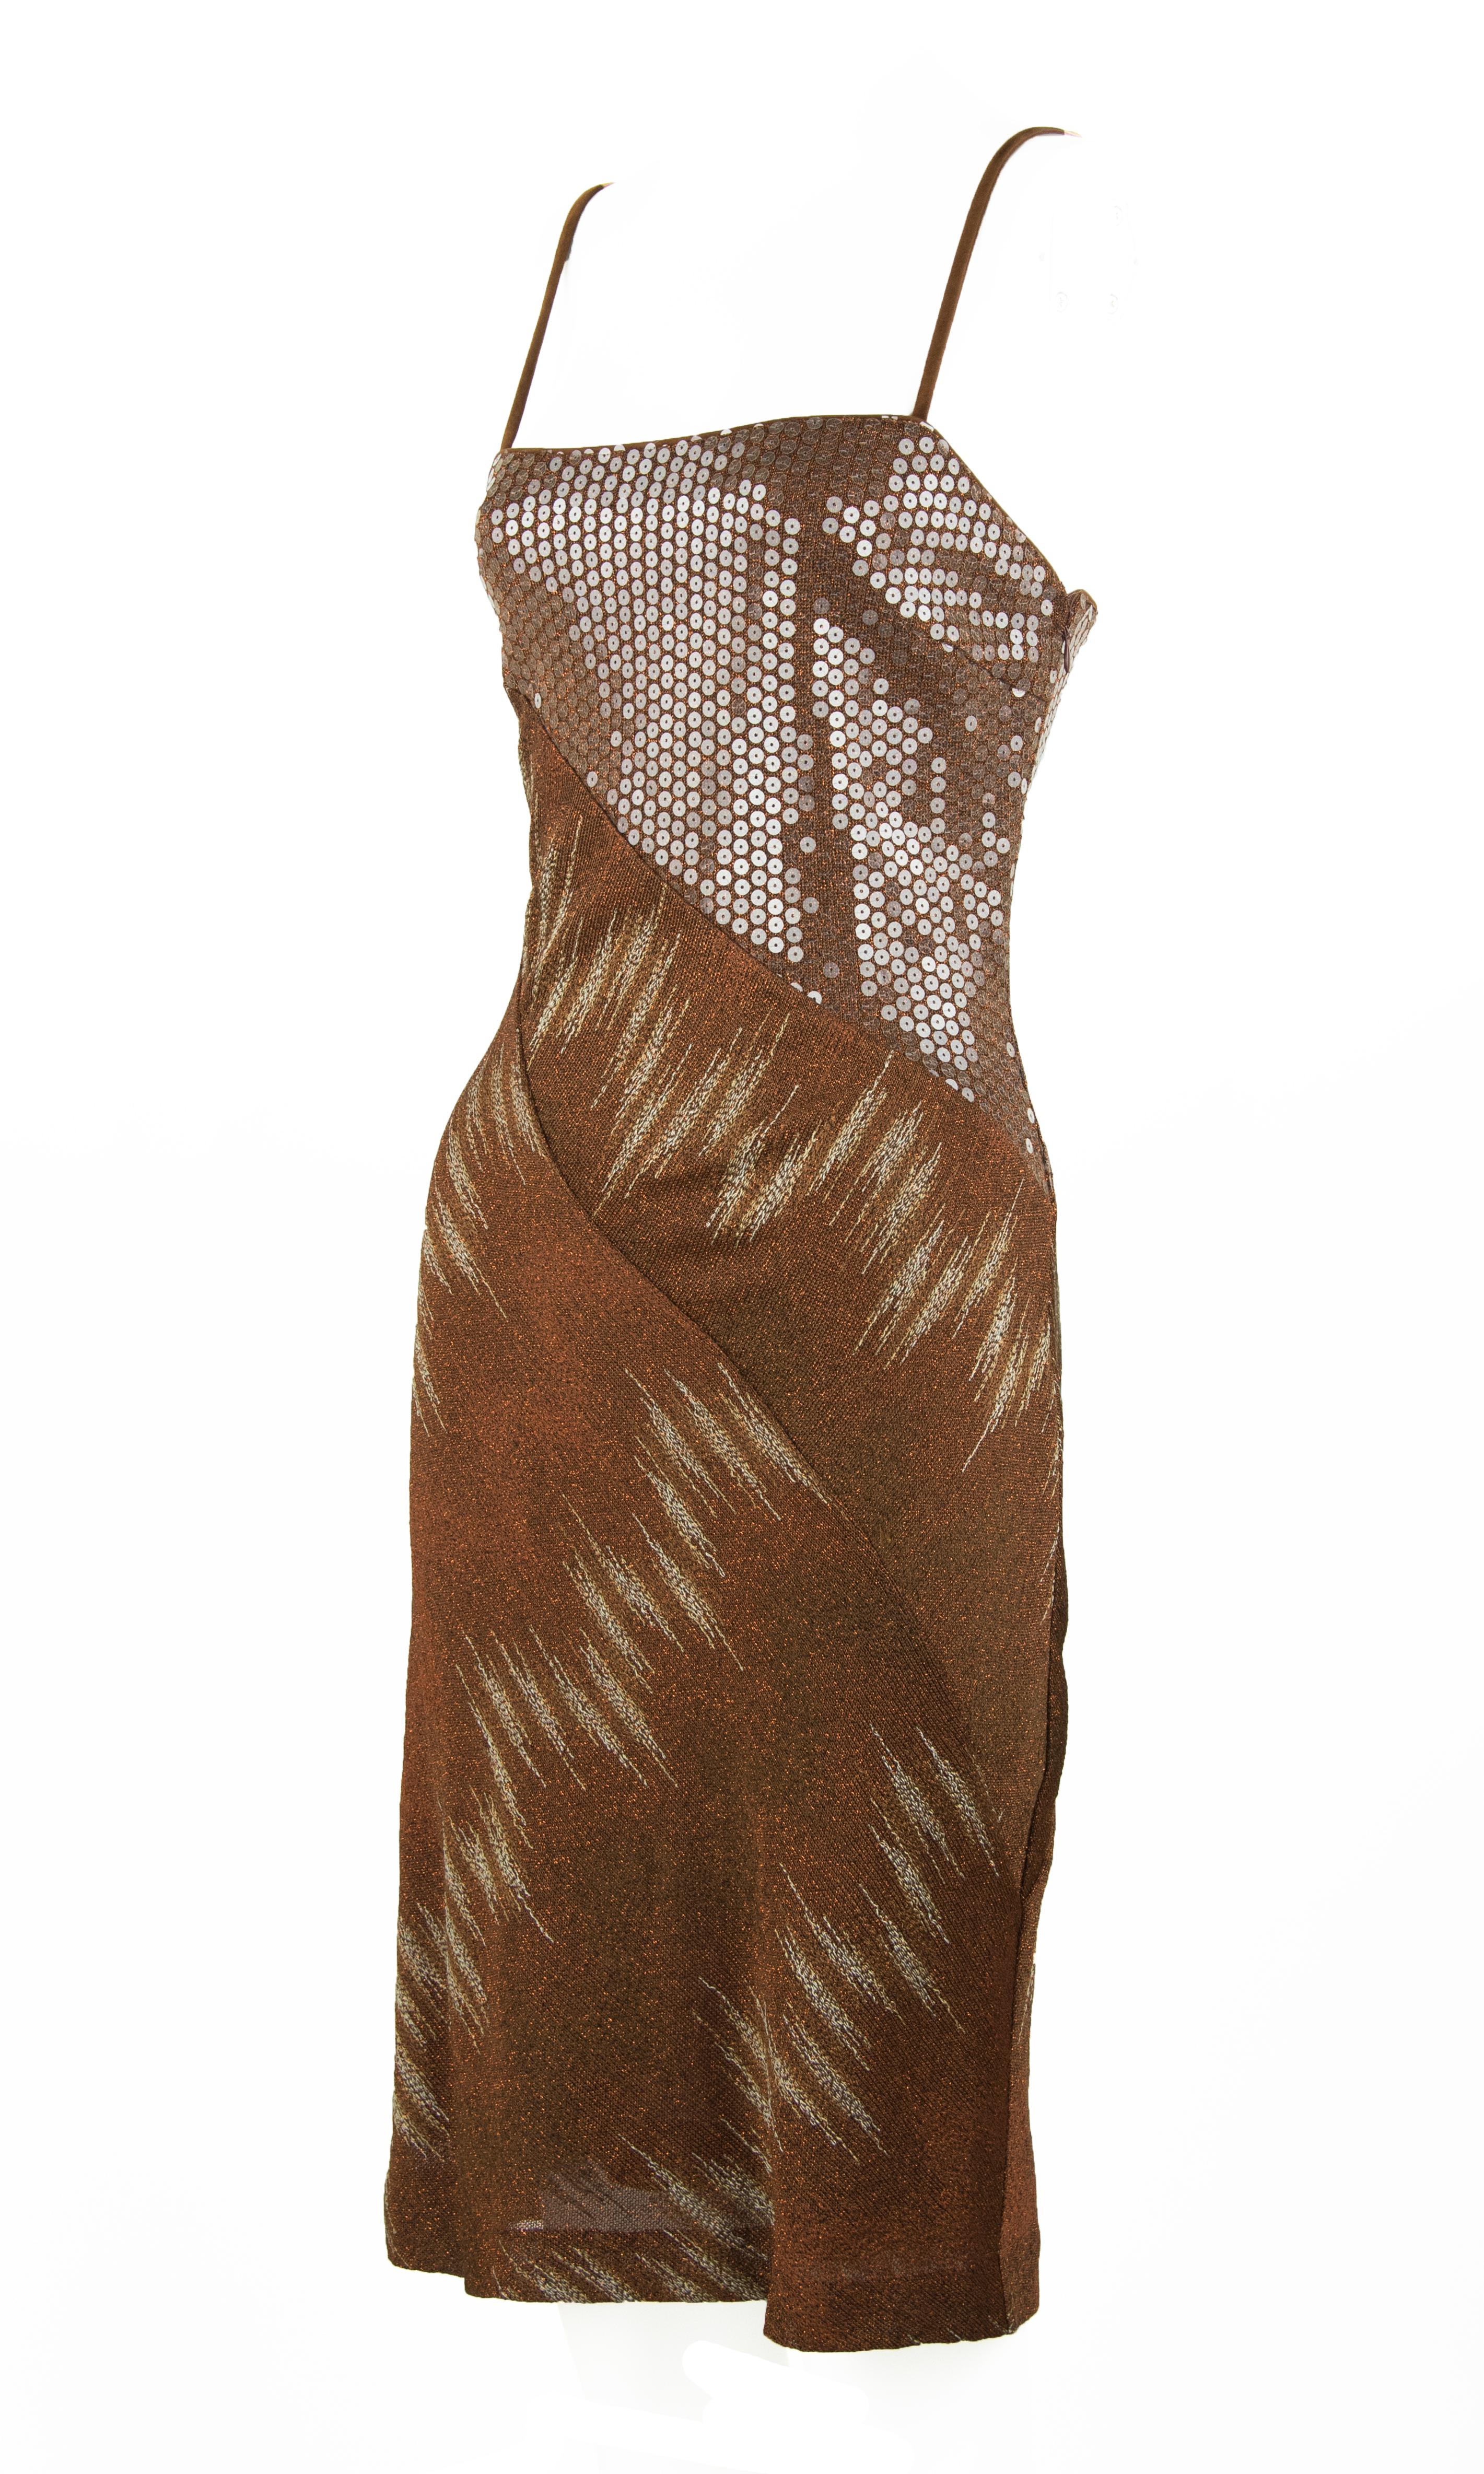 Stunning brown, bronze and gold metallic fabric make up this vintage Missoni dress.  Diagonal, asymmetrical seams add interesting detail.  The fabric is adorned with clear sequins.

Size: S, missing size label but approximate S

Condition: